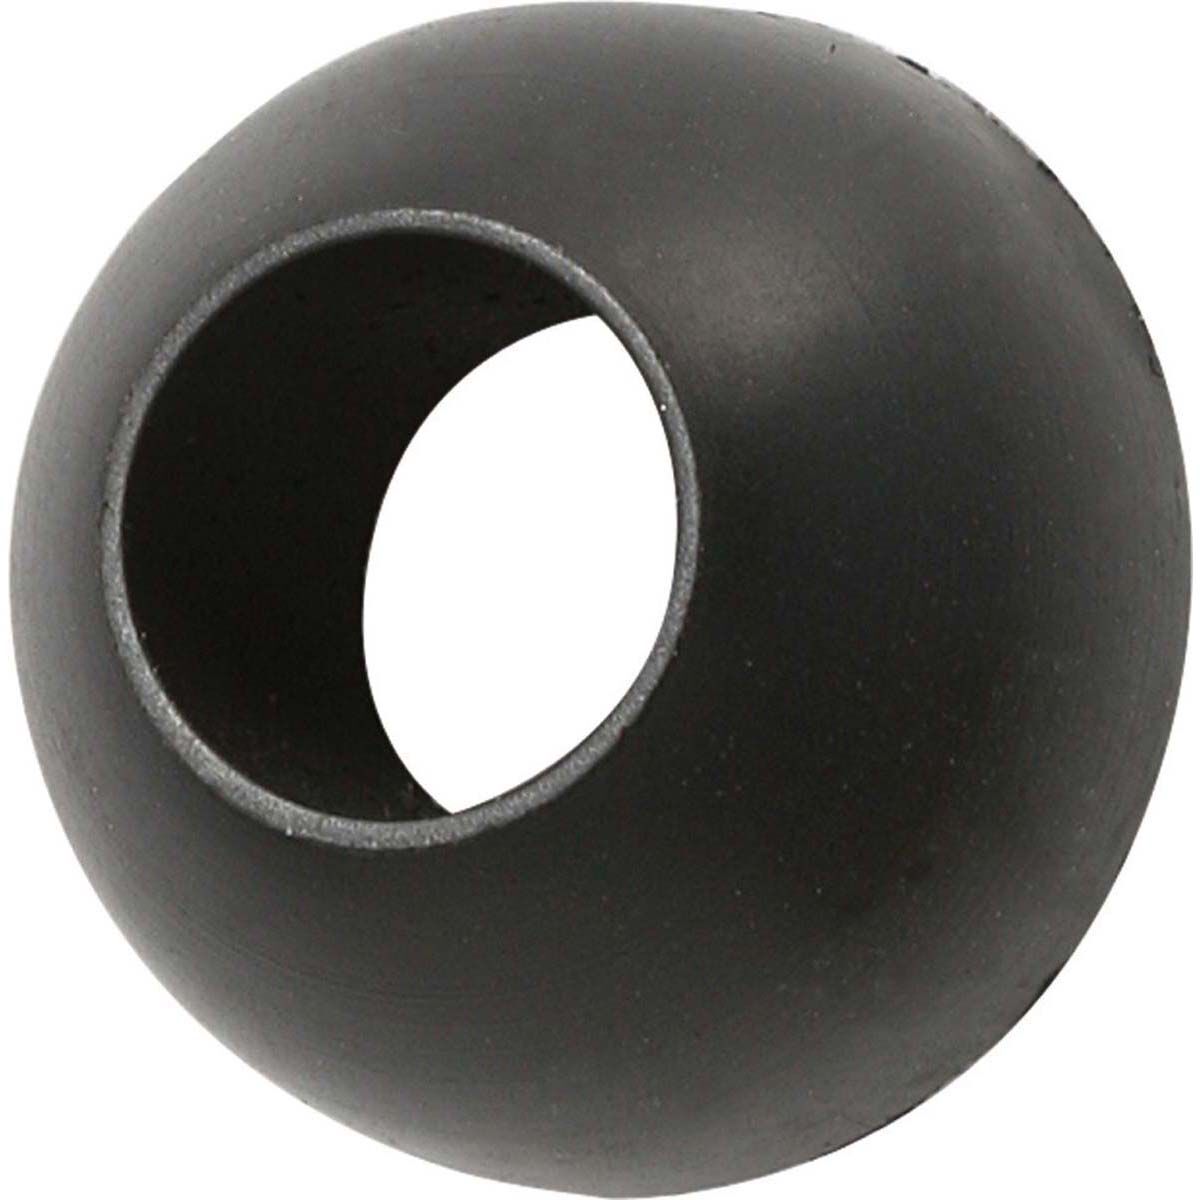 1x REPLACEMENT GASMATE POL GAS LPG PRIMUS INLET FITTING RUBBER BULL NOSE SEAL 